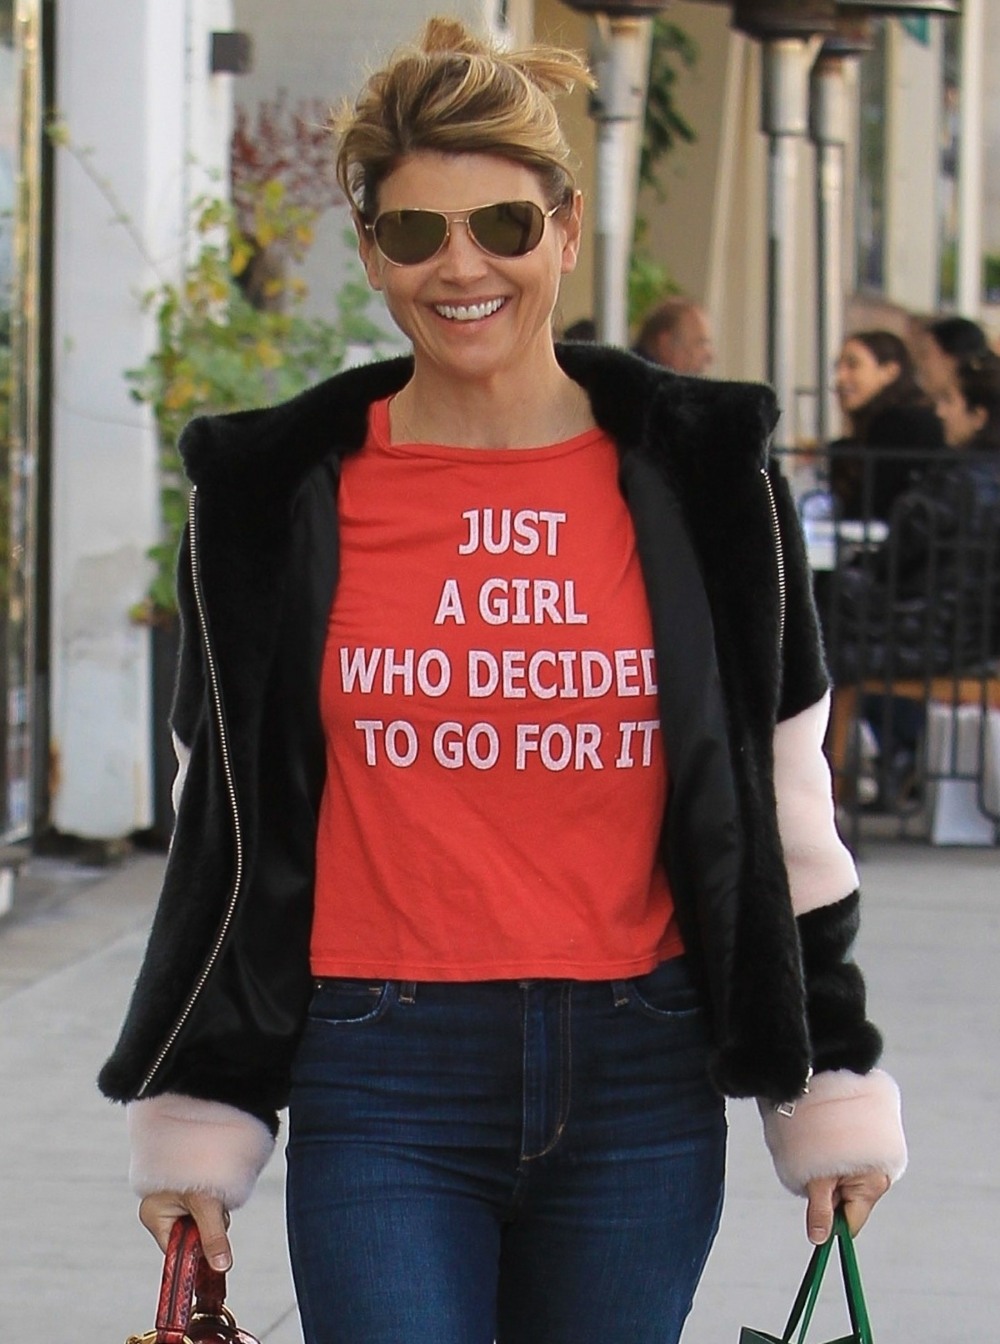 Lori Loughlin: Just a girl who decided to go for it!